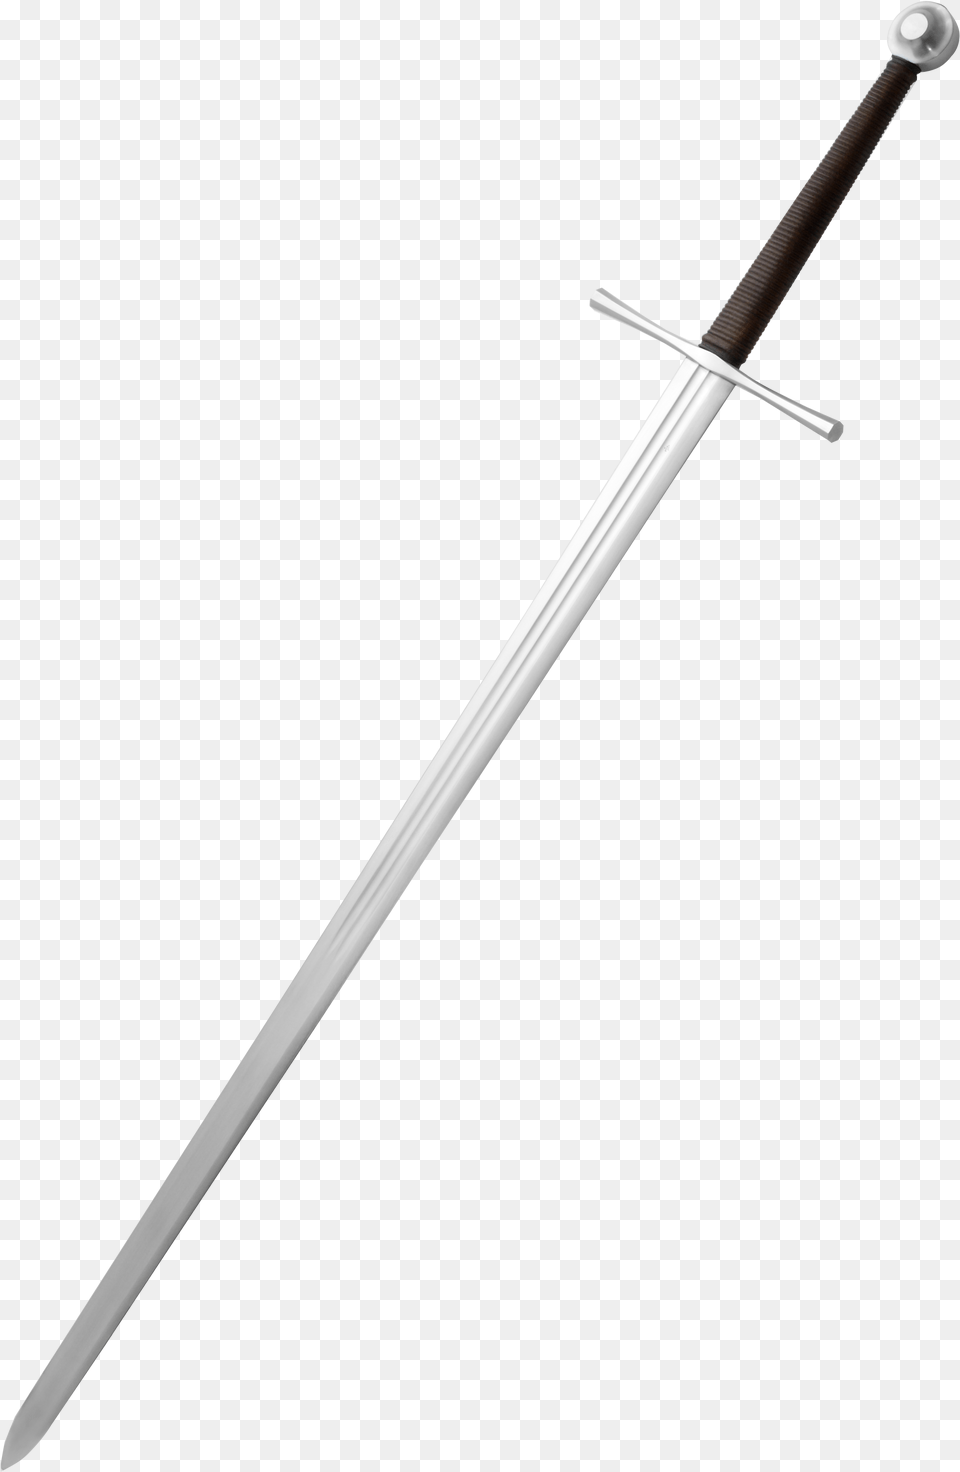 Classification Of Swords White Sword, Weapon, Blade, Dagger, Knife Png